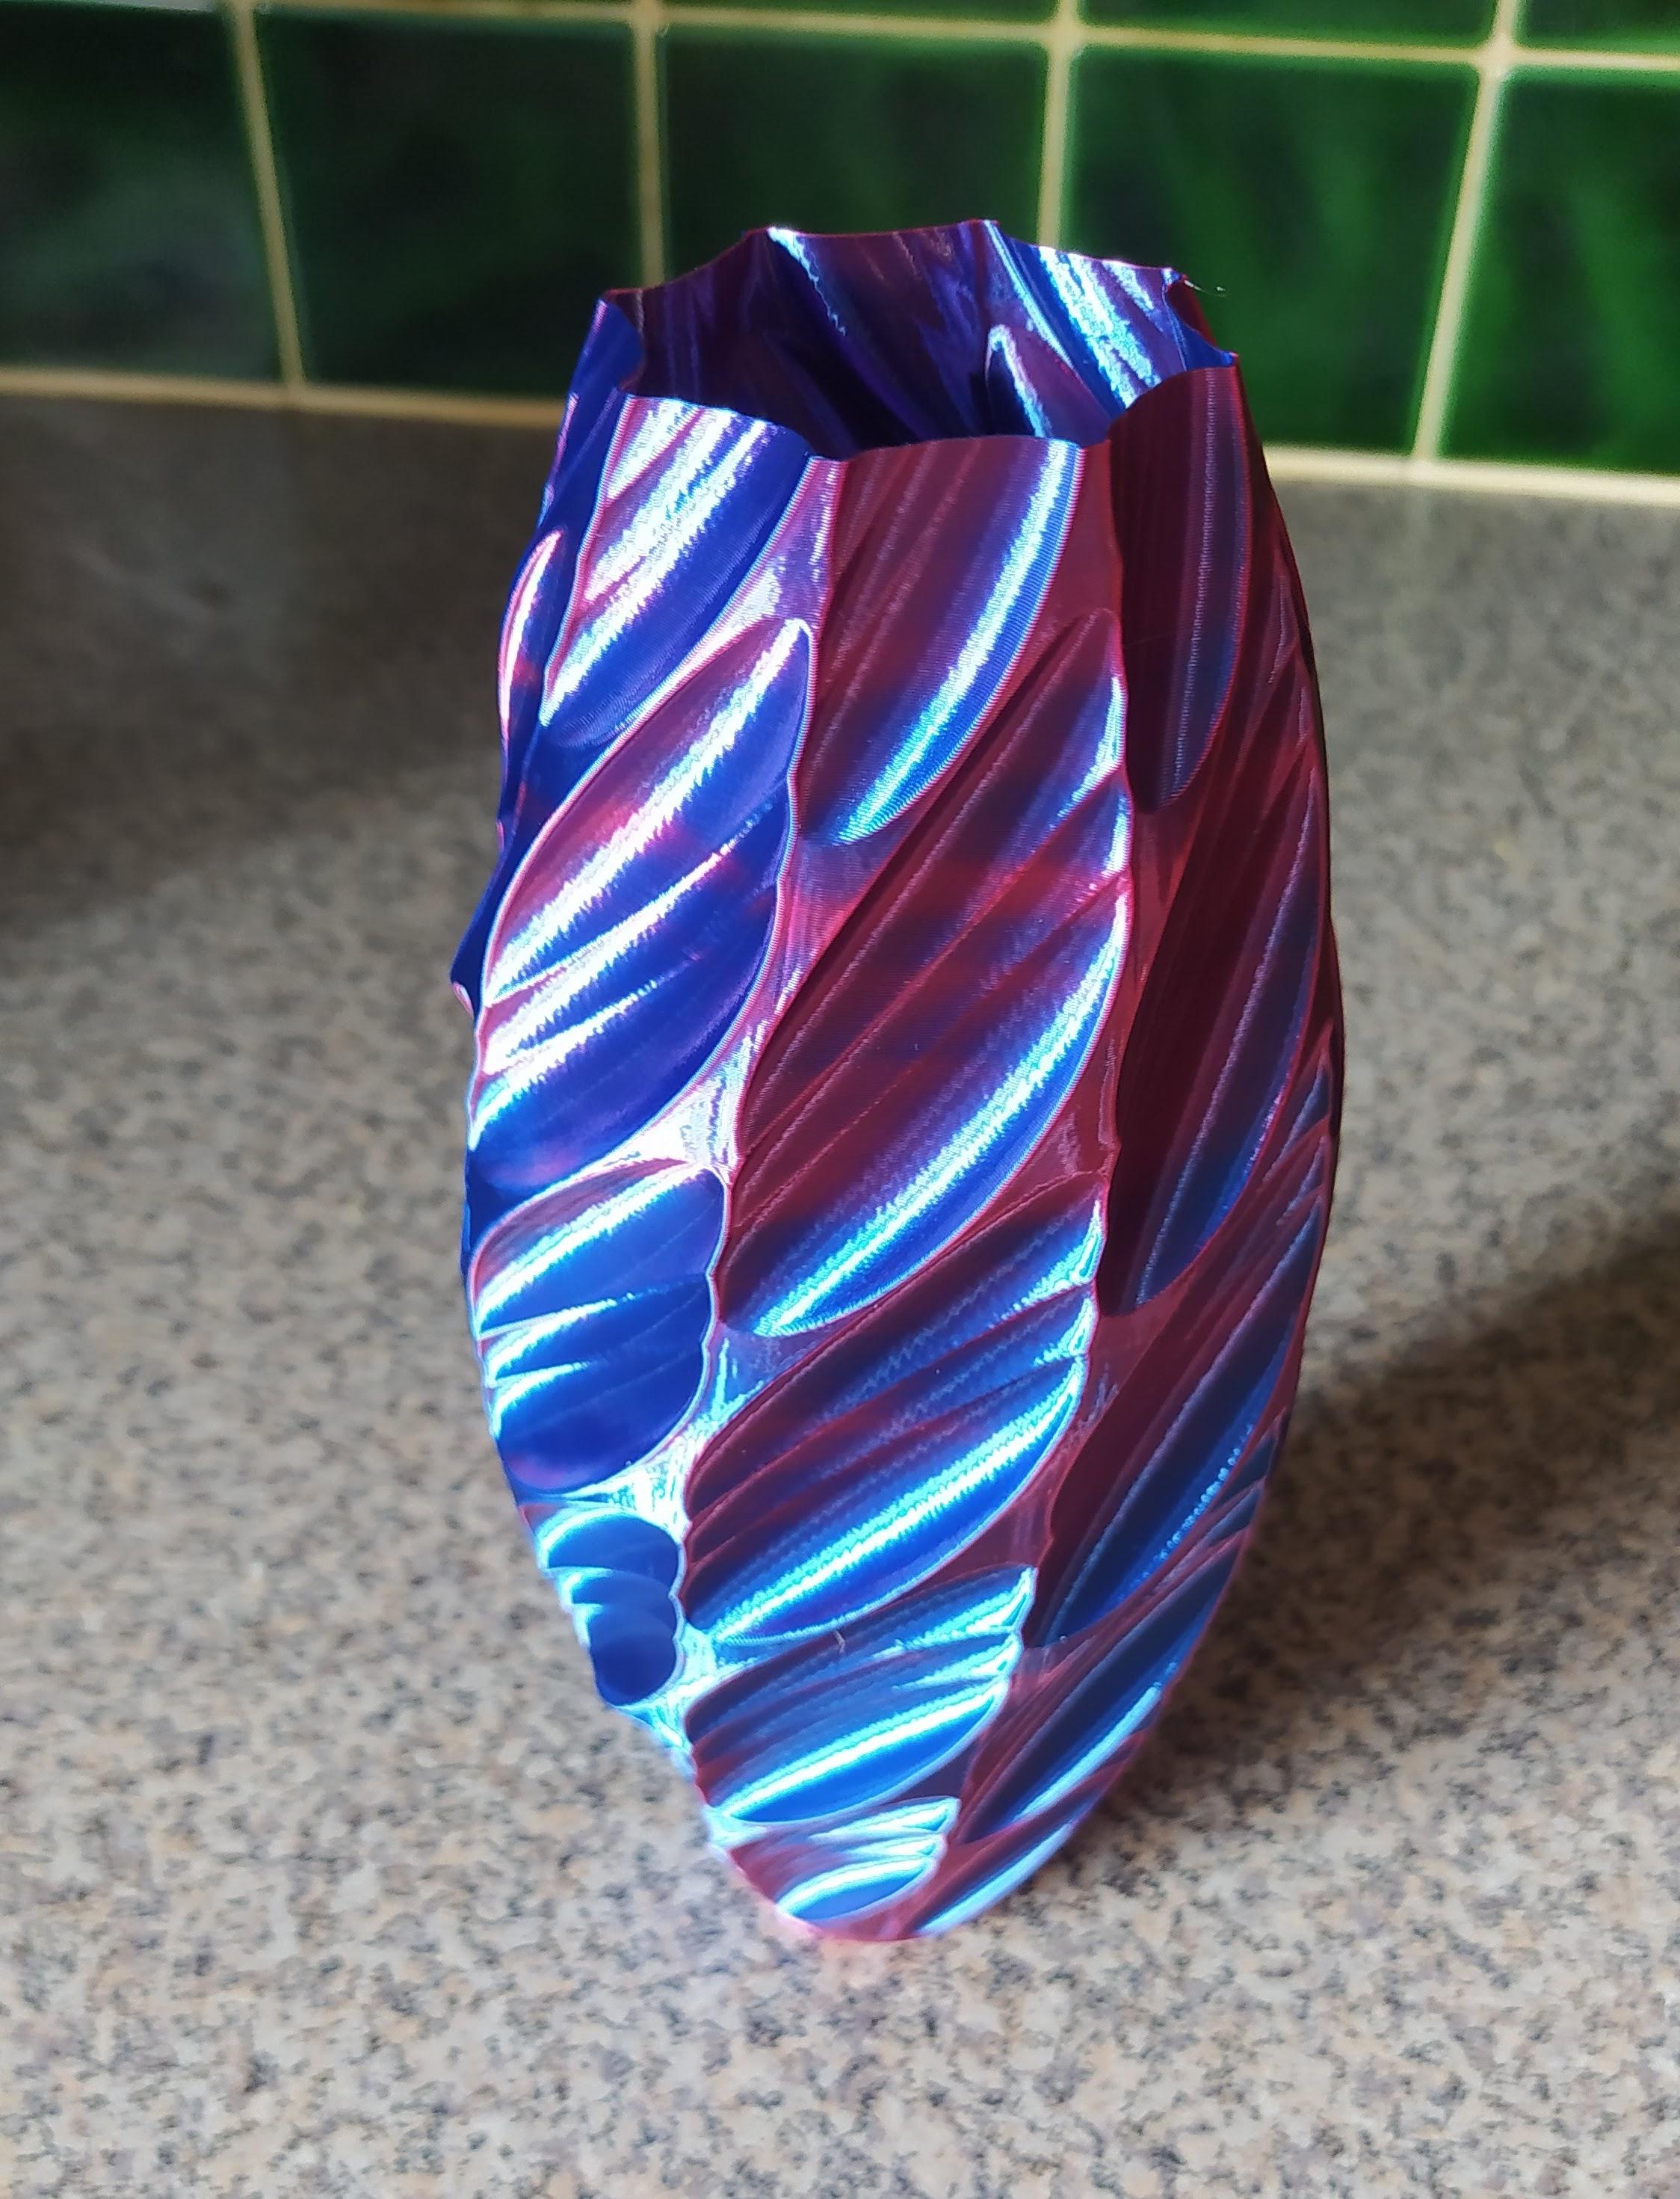 Swirling Leaves Vase - In dual colour silk PLA. Love the effect with this design. Model prints easily in spiralise mode too, no fiddling with settings required.  - 3d model